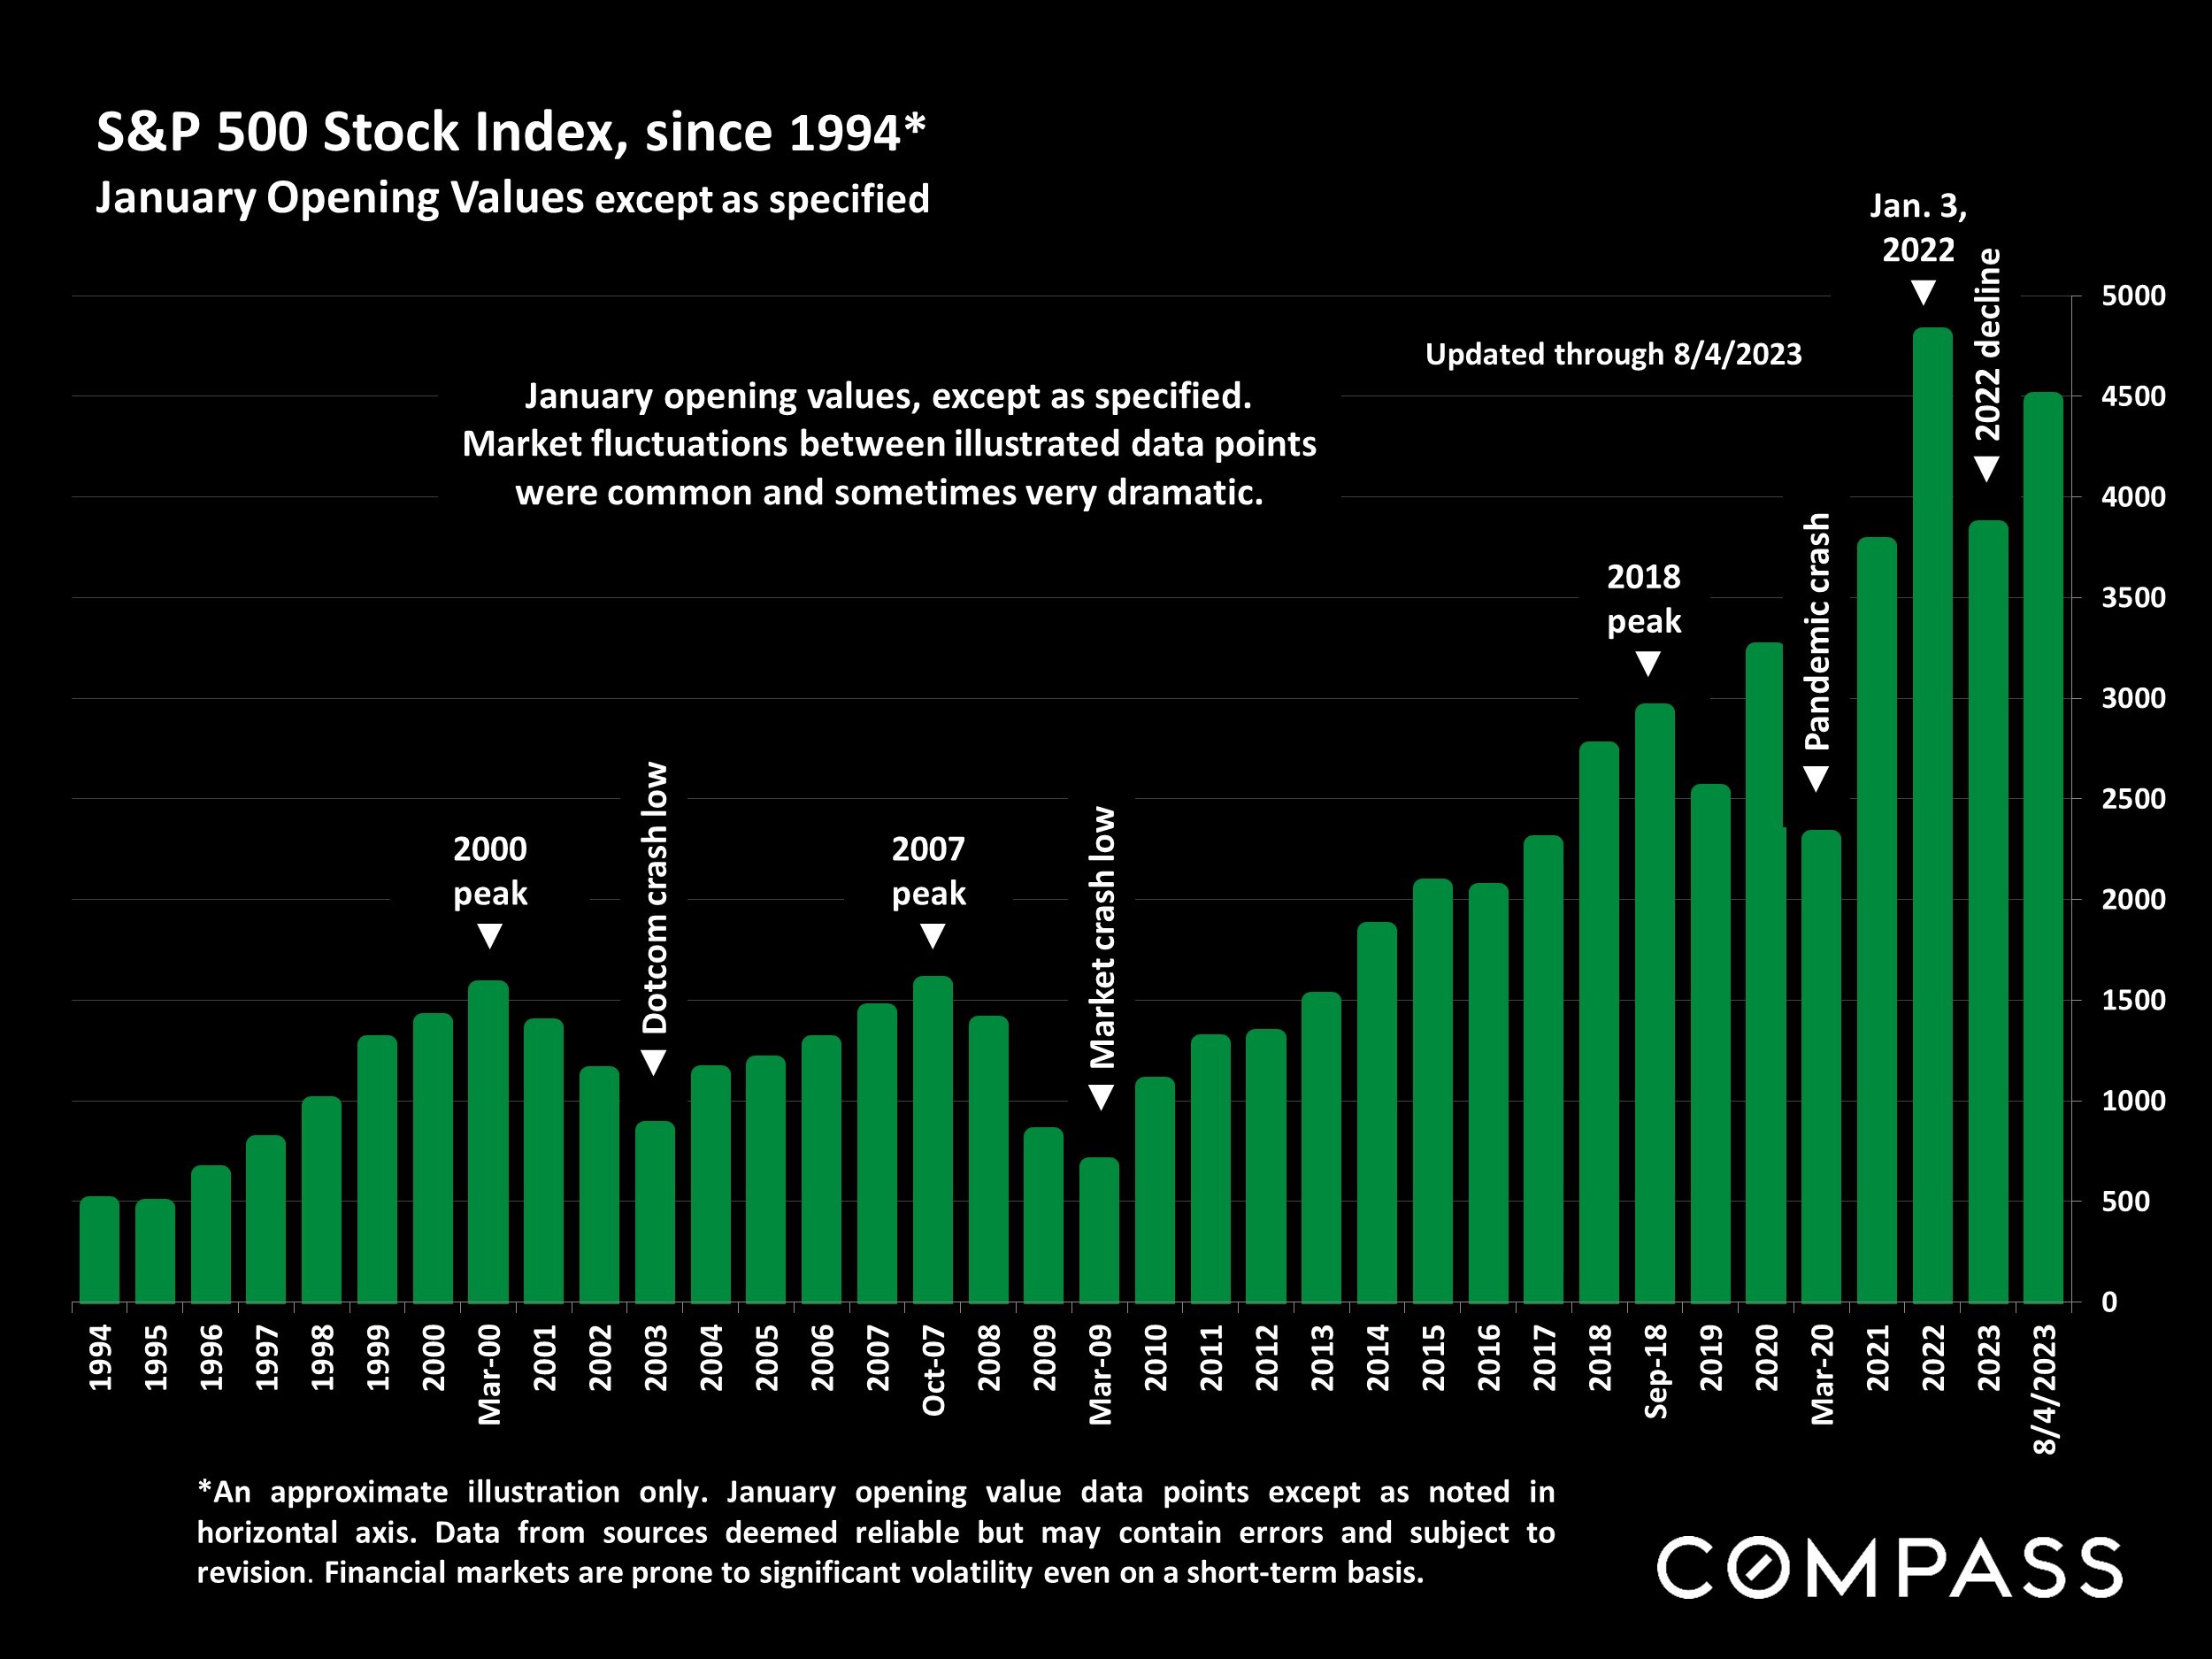 S&P 500 stock index since 1994